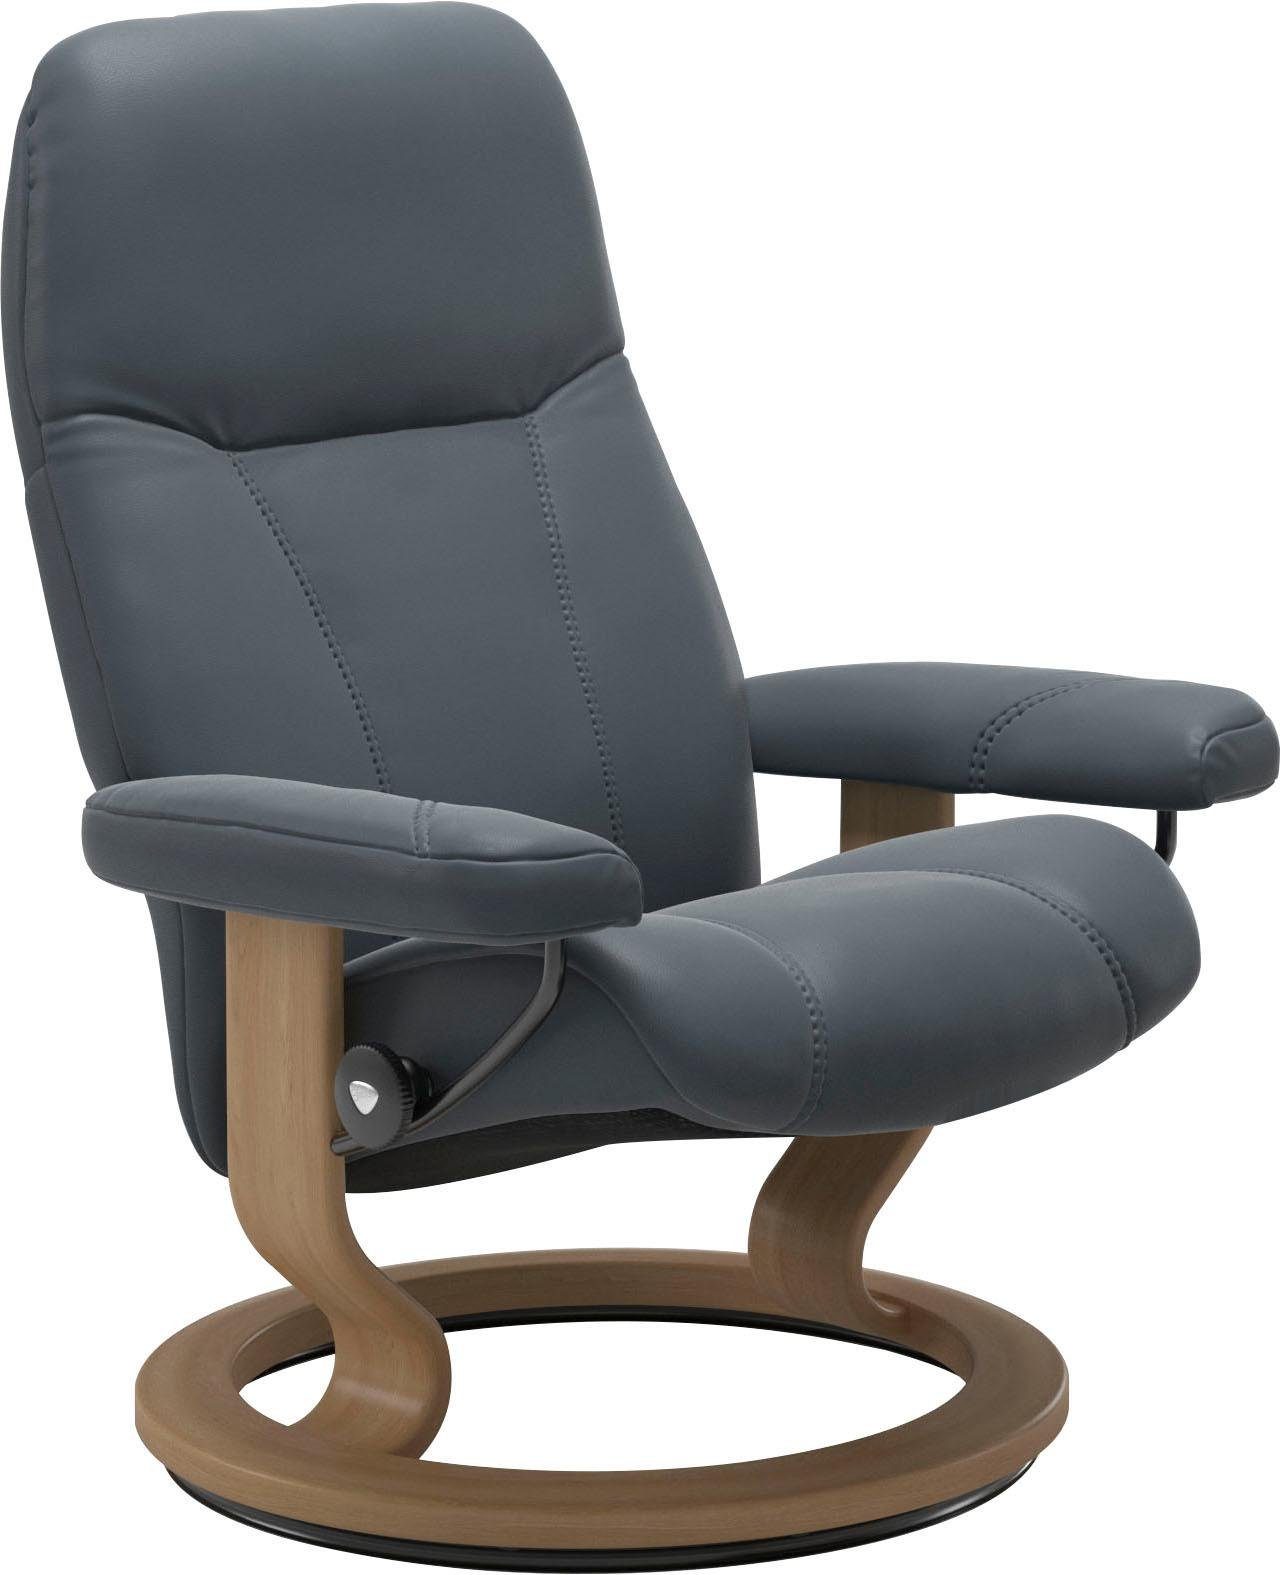 Stressless® Relaxsessel Consul, mit Classic Base, Größe L, Gestell Eiche | Funktionssessel